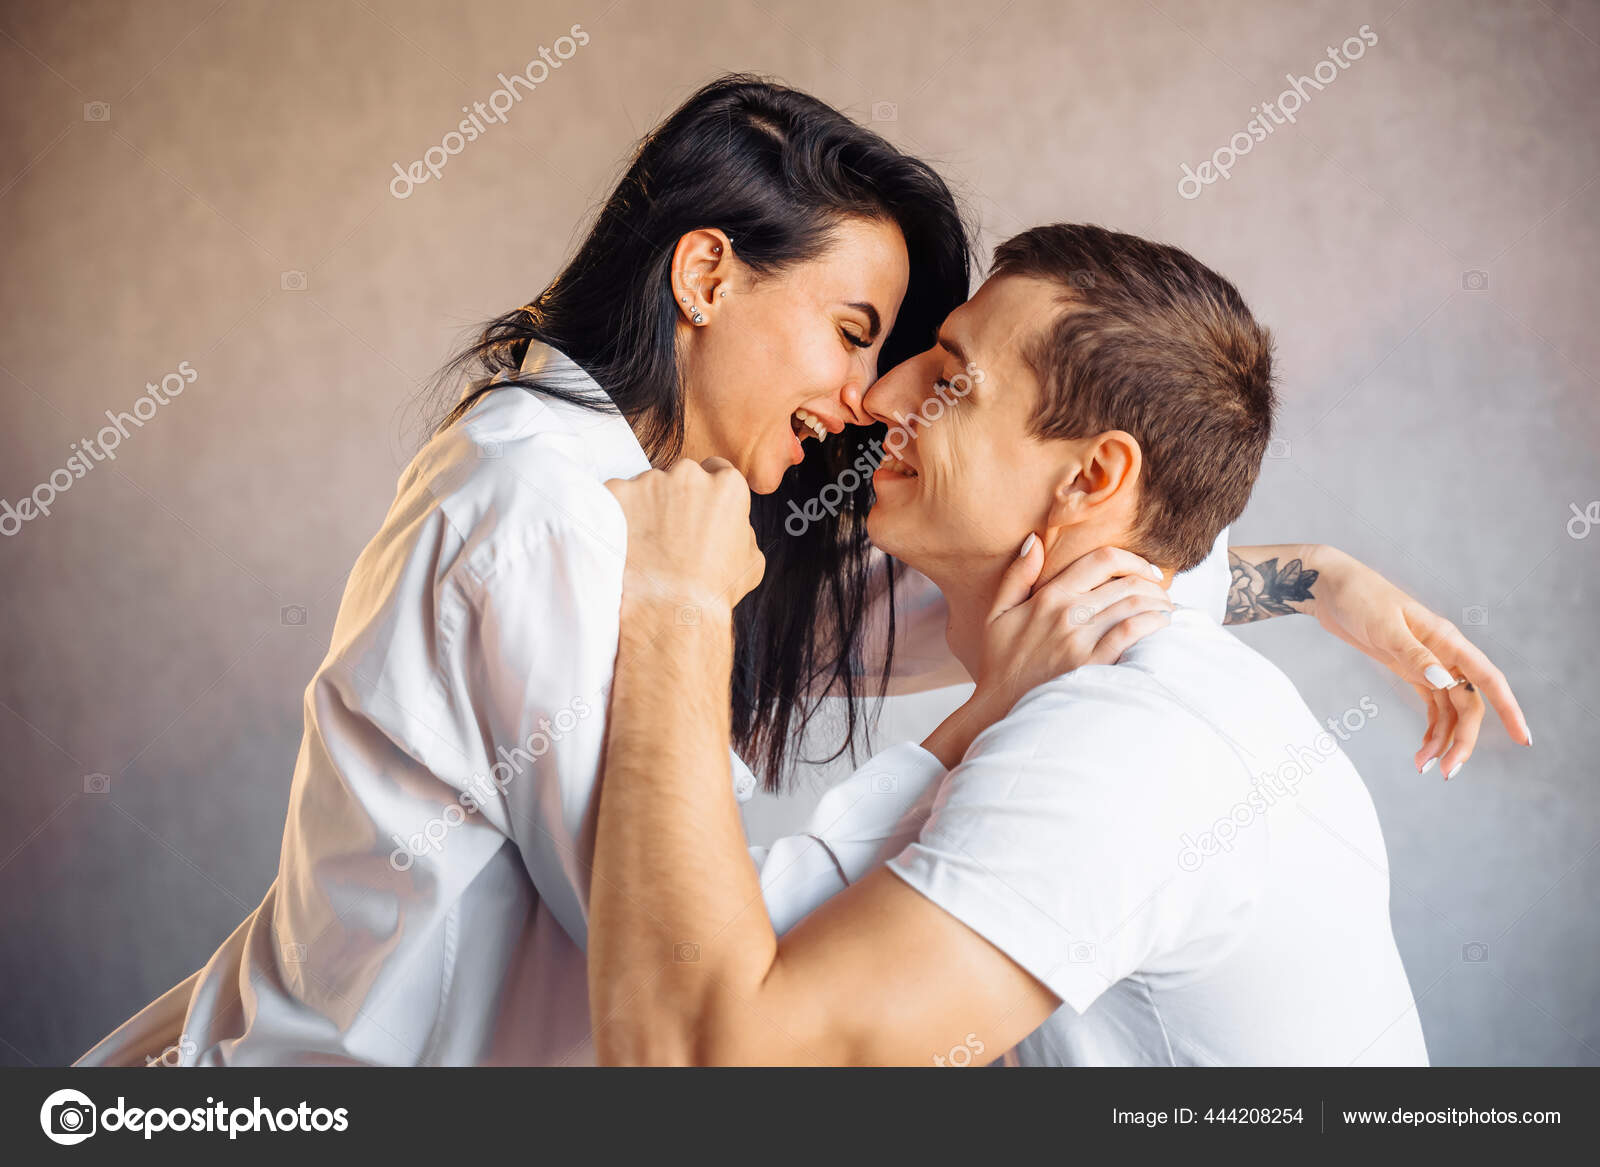 Beautiful Passionate Couple Having Sex Bed Cheerful Romantic Lovers Hugging Stock Photo by ©dariaagaf 444208254 picture